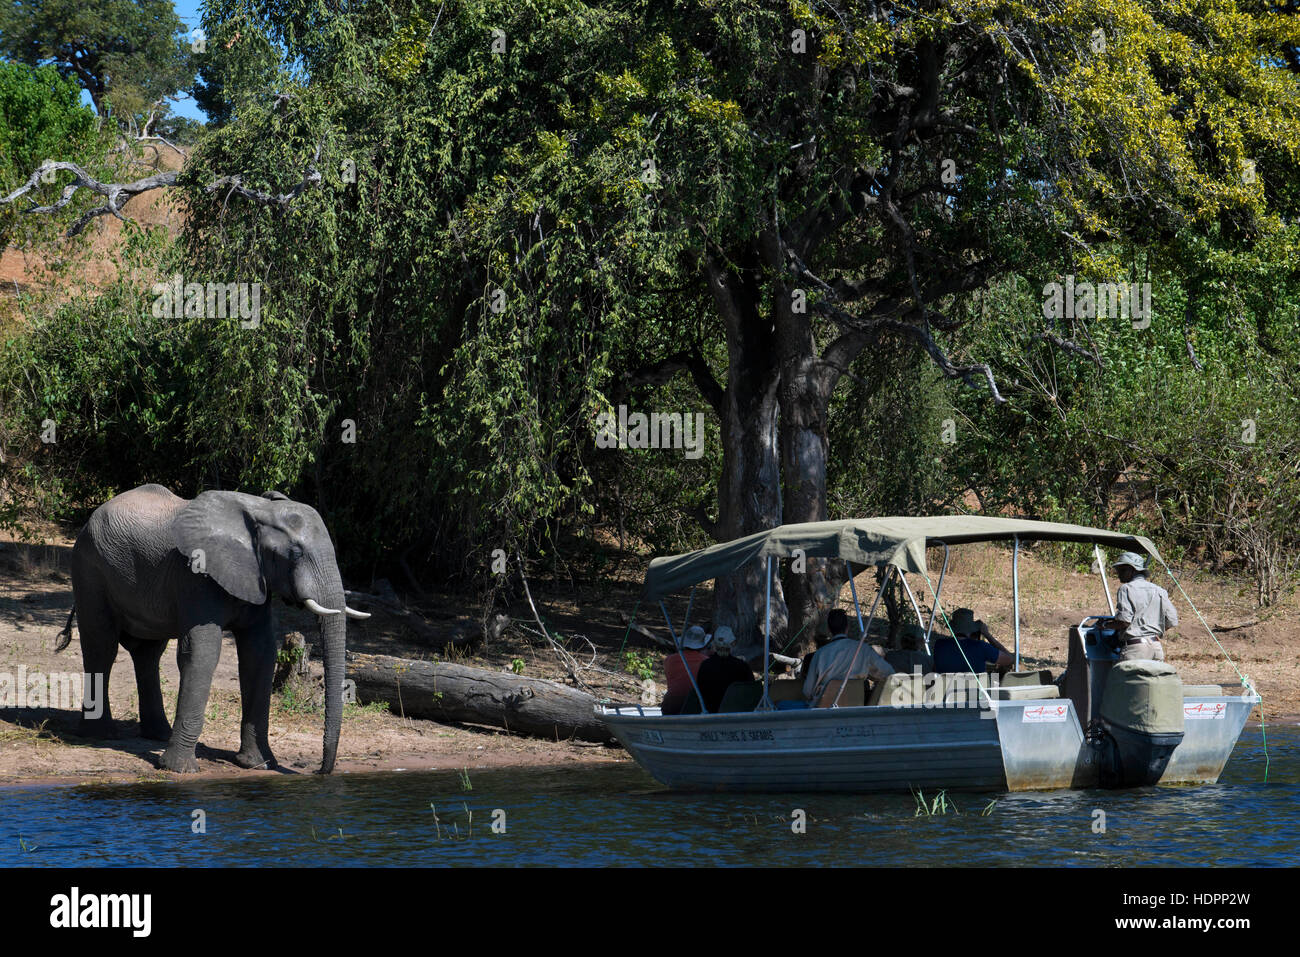 From Victoria Falls is possible to visit the nearby Botswana. Specifically Chobe National Park. Elephants Crossing: River Safari on the Chobe. Out on Stock Photo